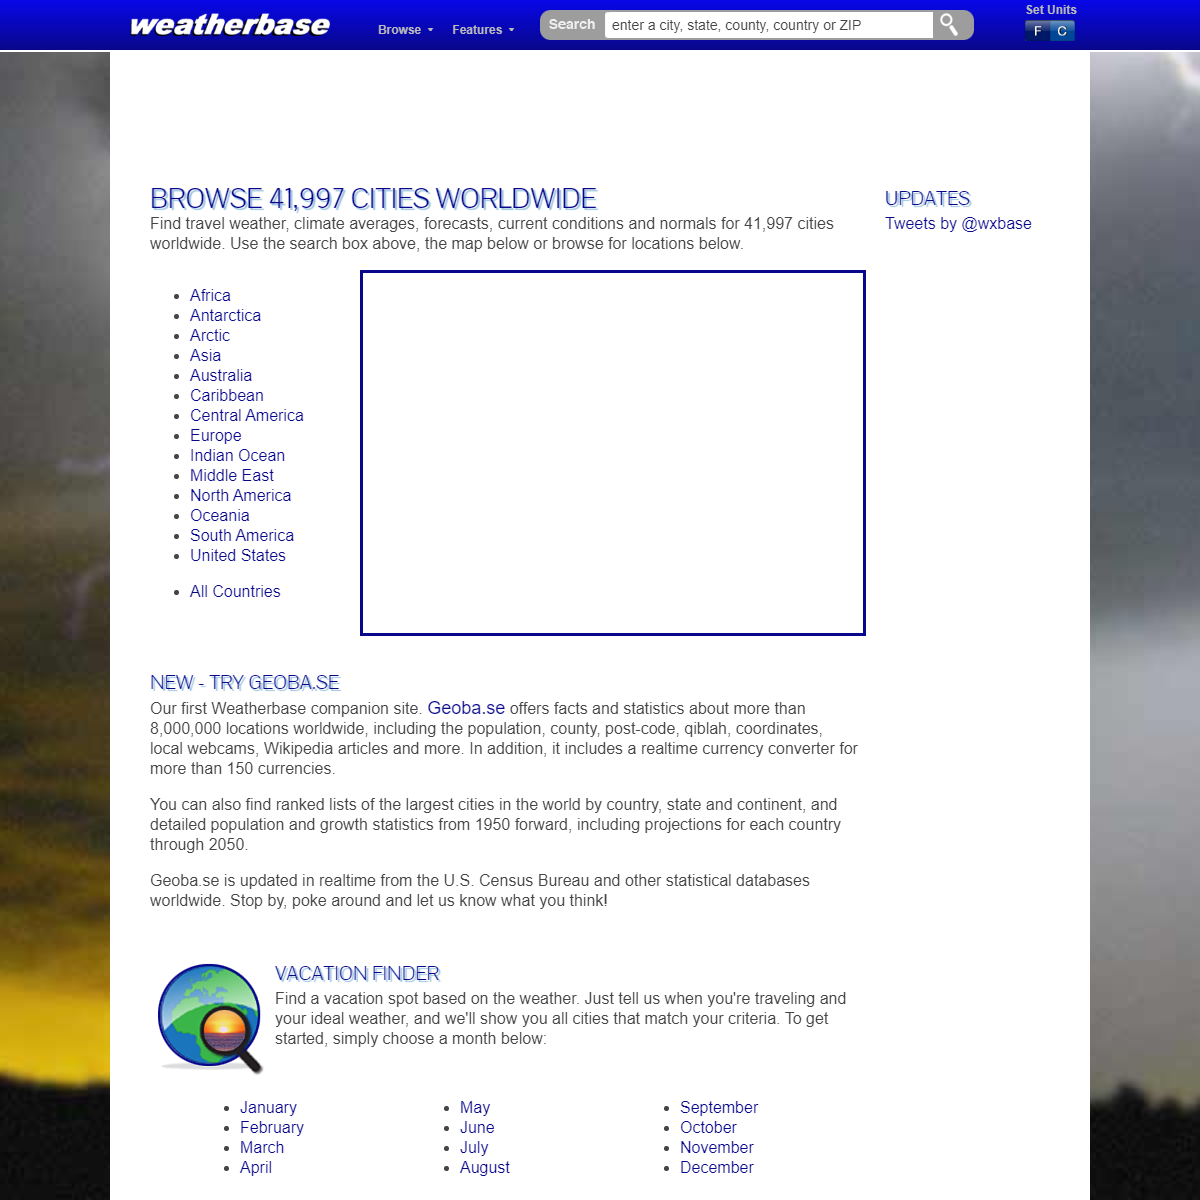 A complete backup of http://www.weatherbase.com/